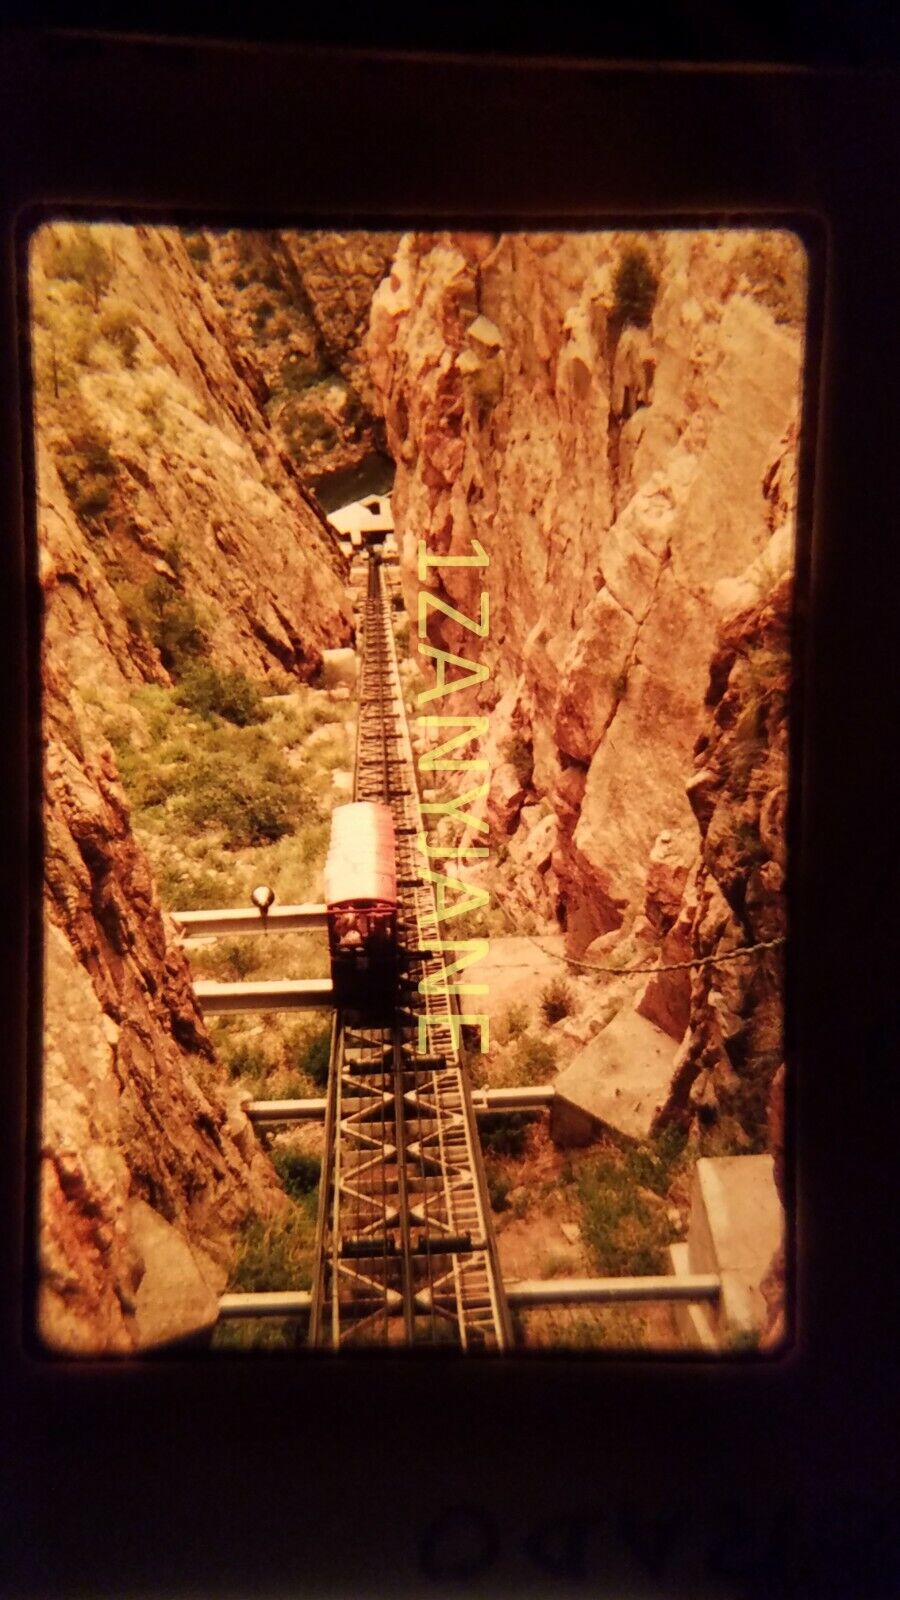 AX01 VINTAGE 35mm SLIDE Photo AERIAL SHOT OF TRAIN ON TRACKS IN ROYAL GORGE CO